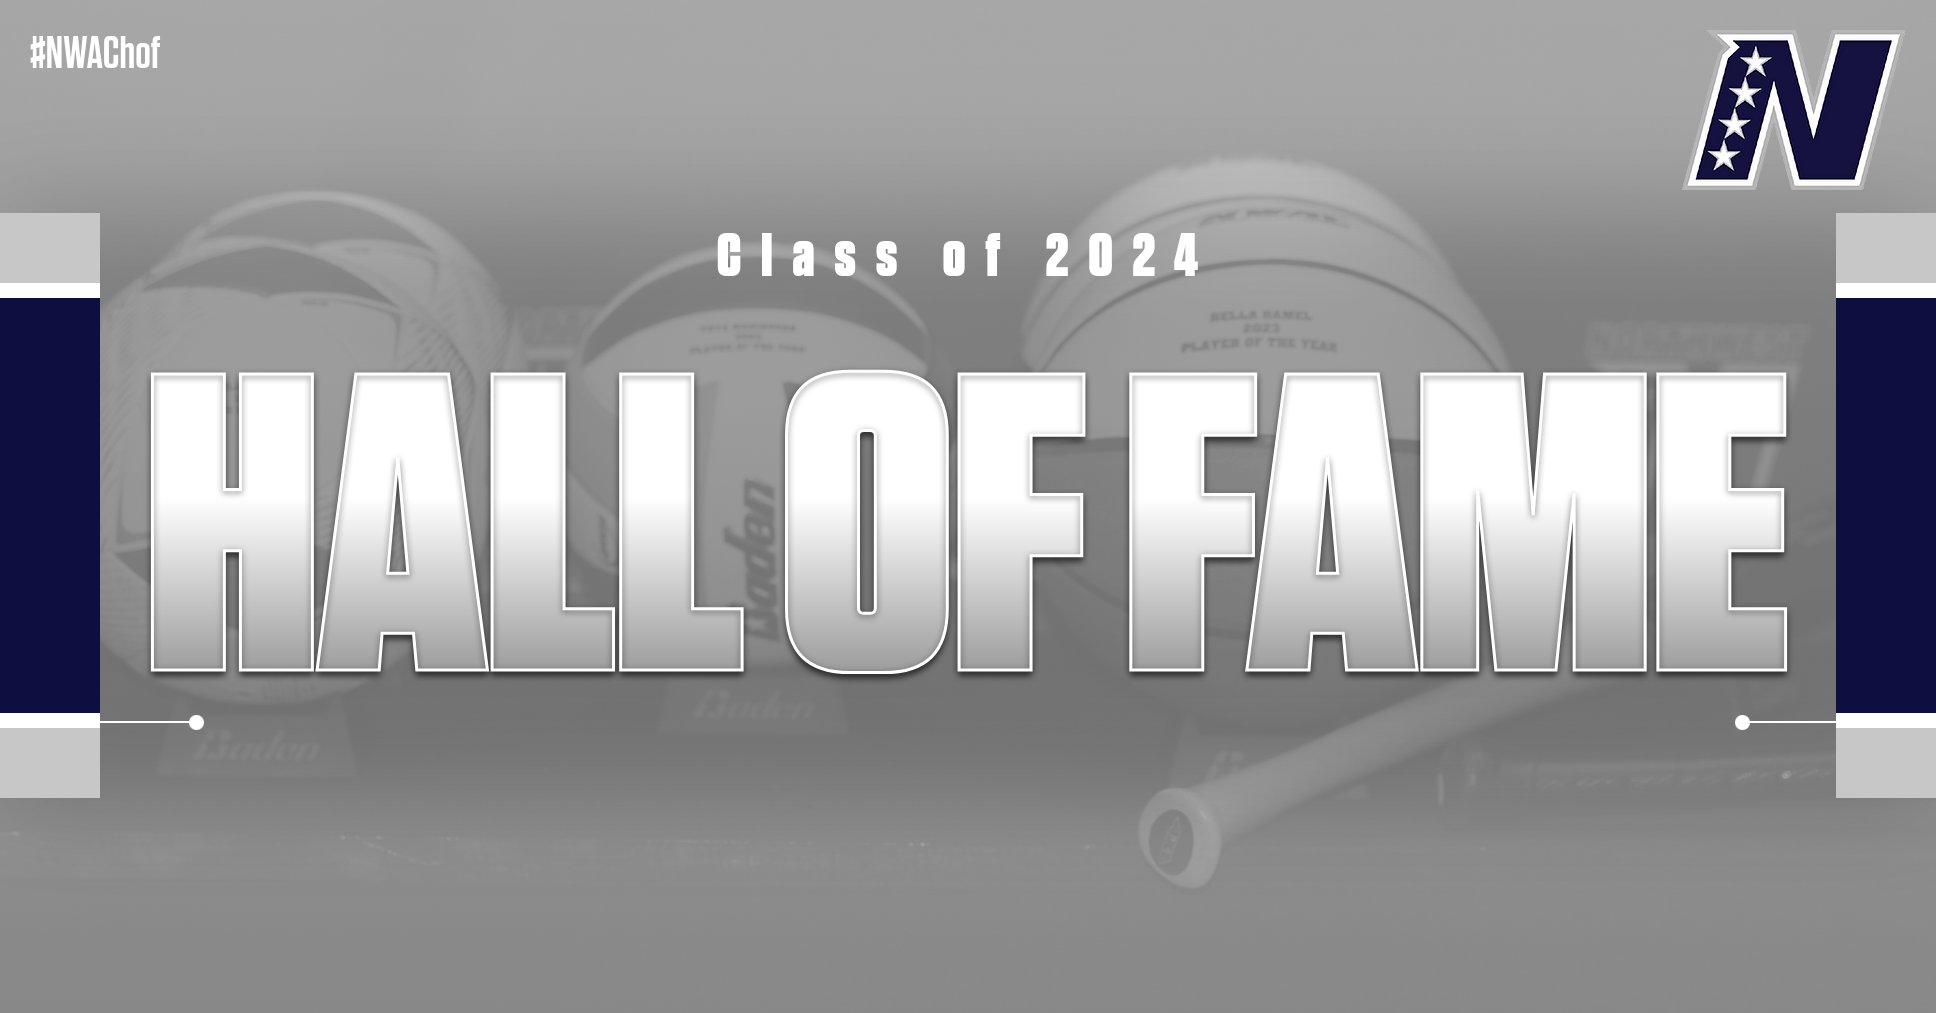 NWAC Announces Hall of Fame Class of 2024